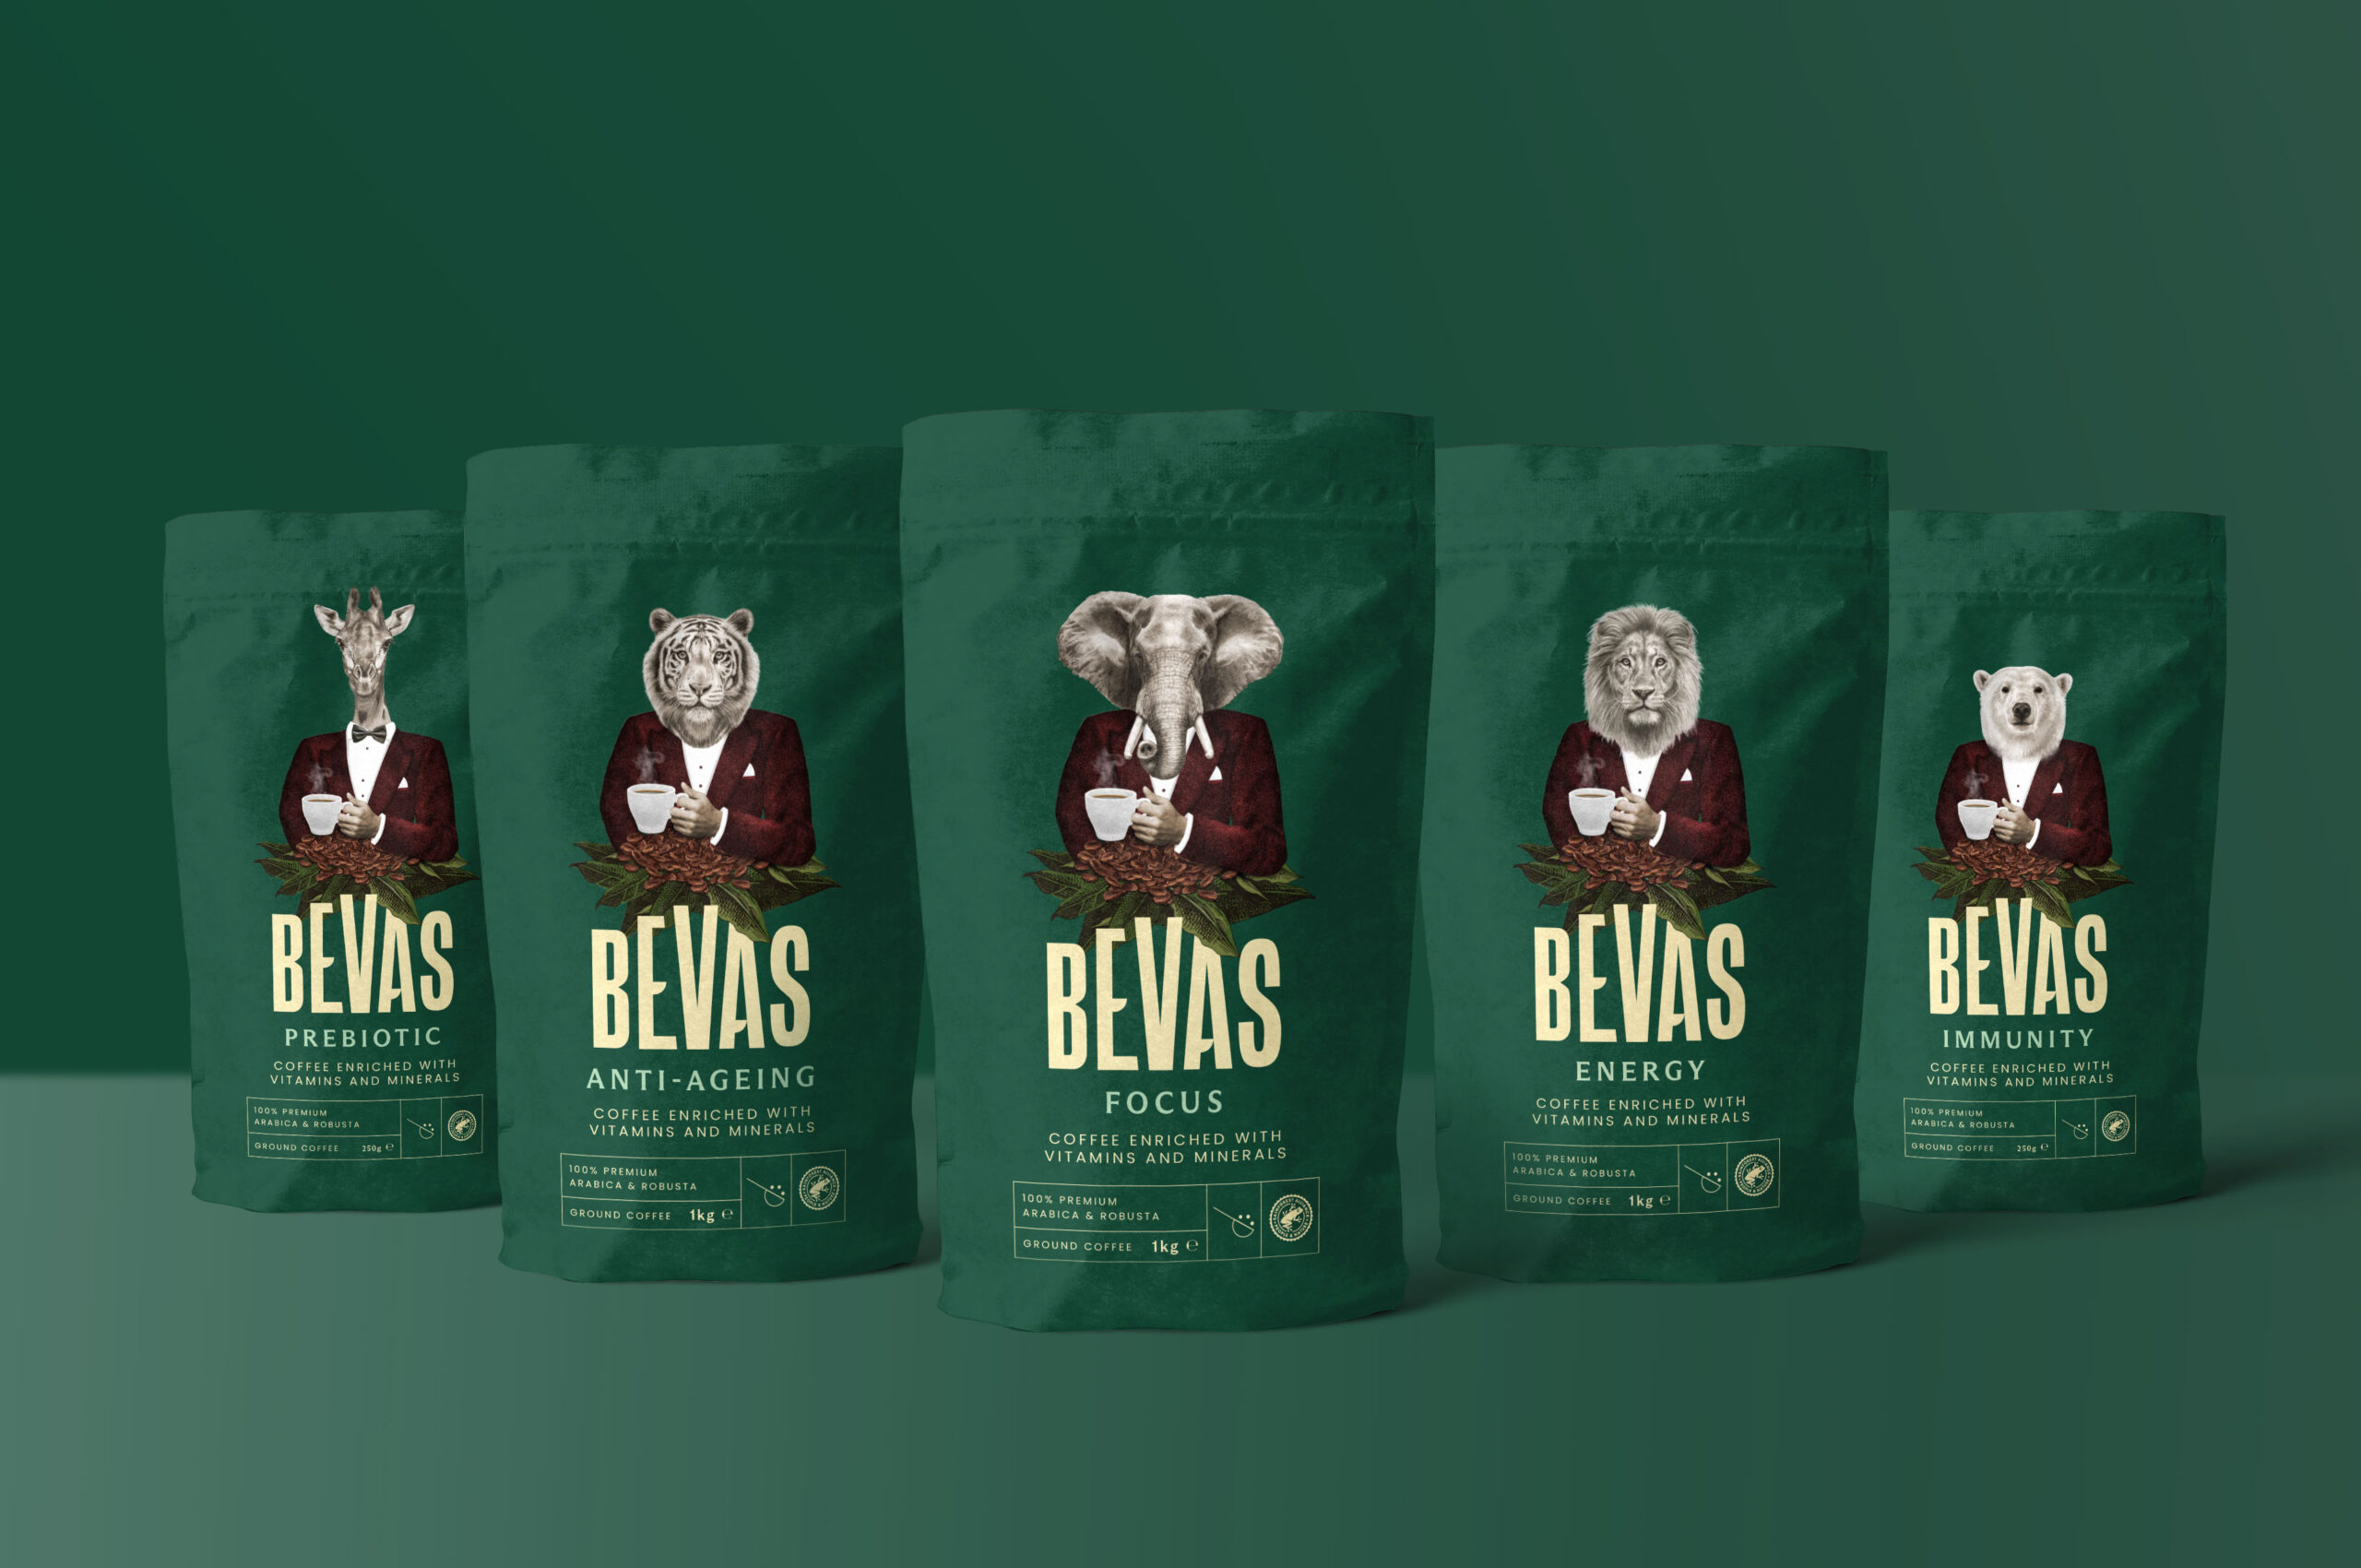 Bevas: A New Breed of Functional Coffee Blends with Innovative Packaging Design by White Bear Studio